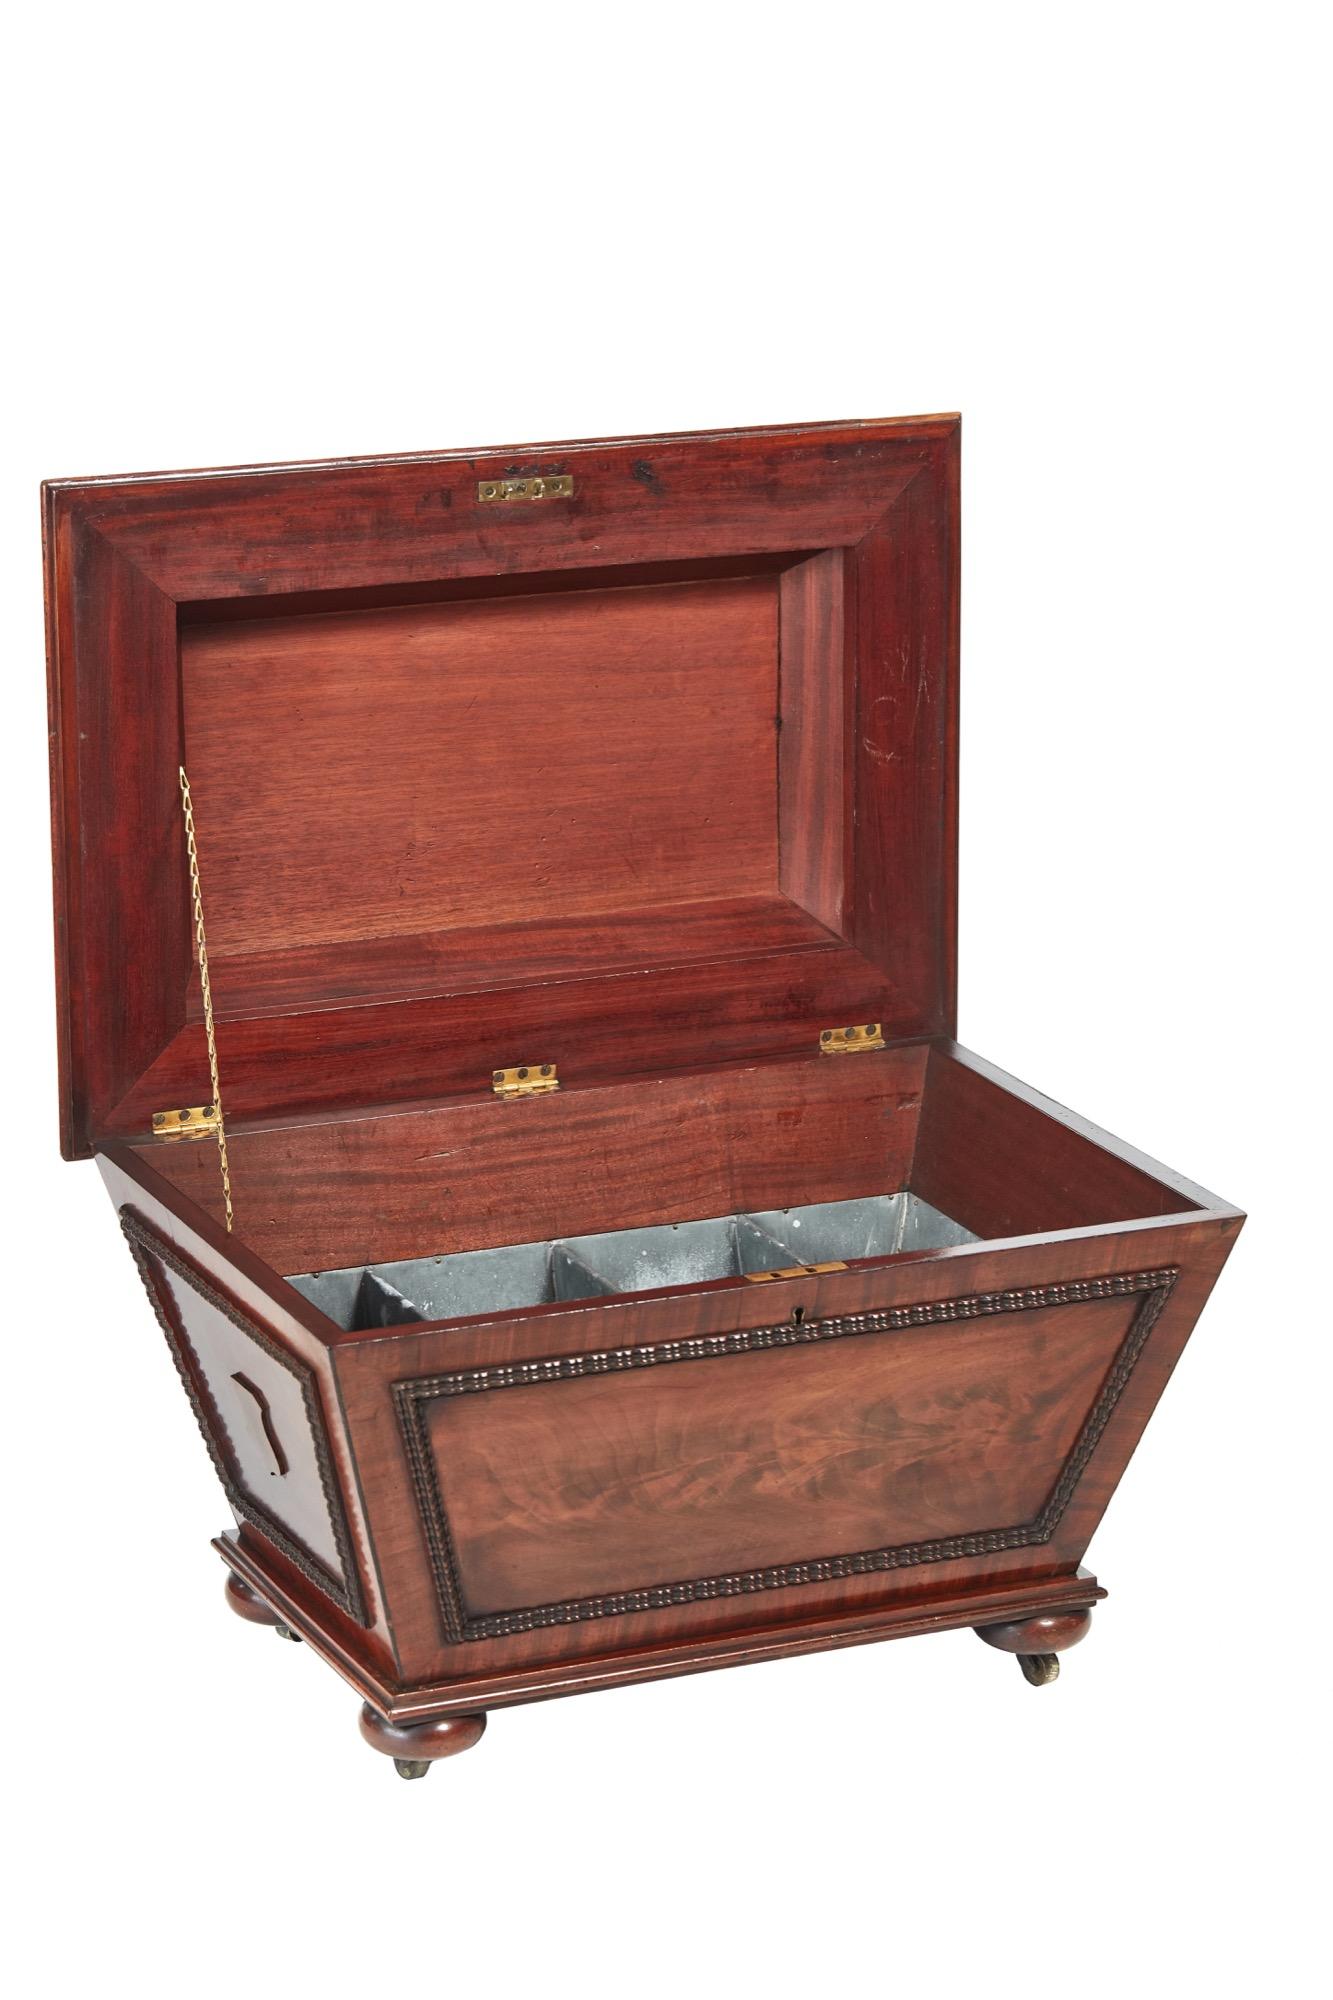 This is a fine antique William IV antique carved mahogany wine cooler in a sarcophagus shape, fantastic quality expertly carved lift up lid, original fitted interior, beautiful carved mouldings to the front and sides. It stands on bun feet with